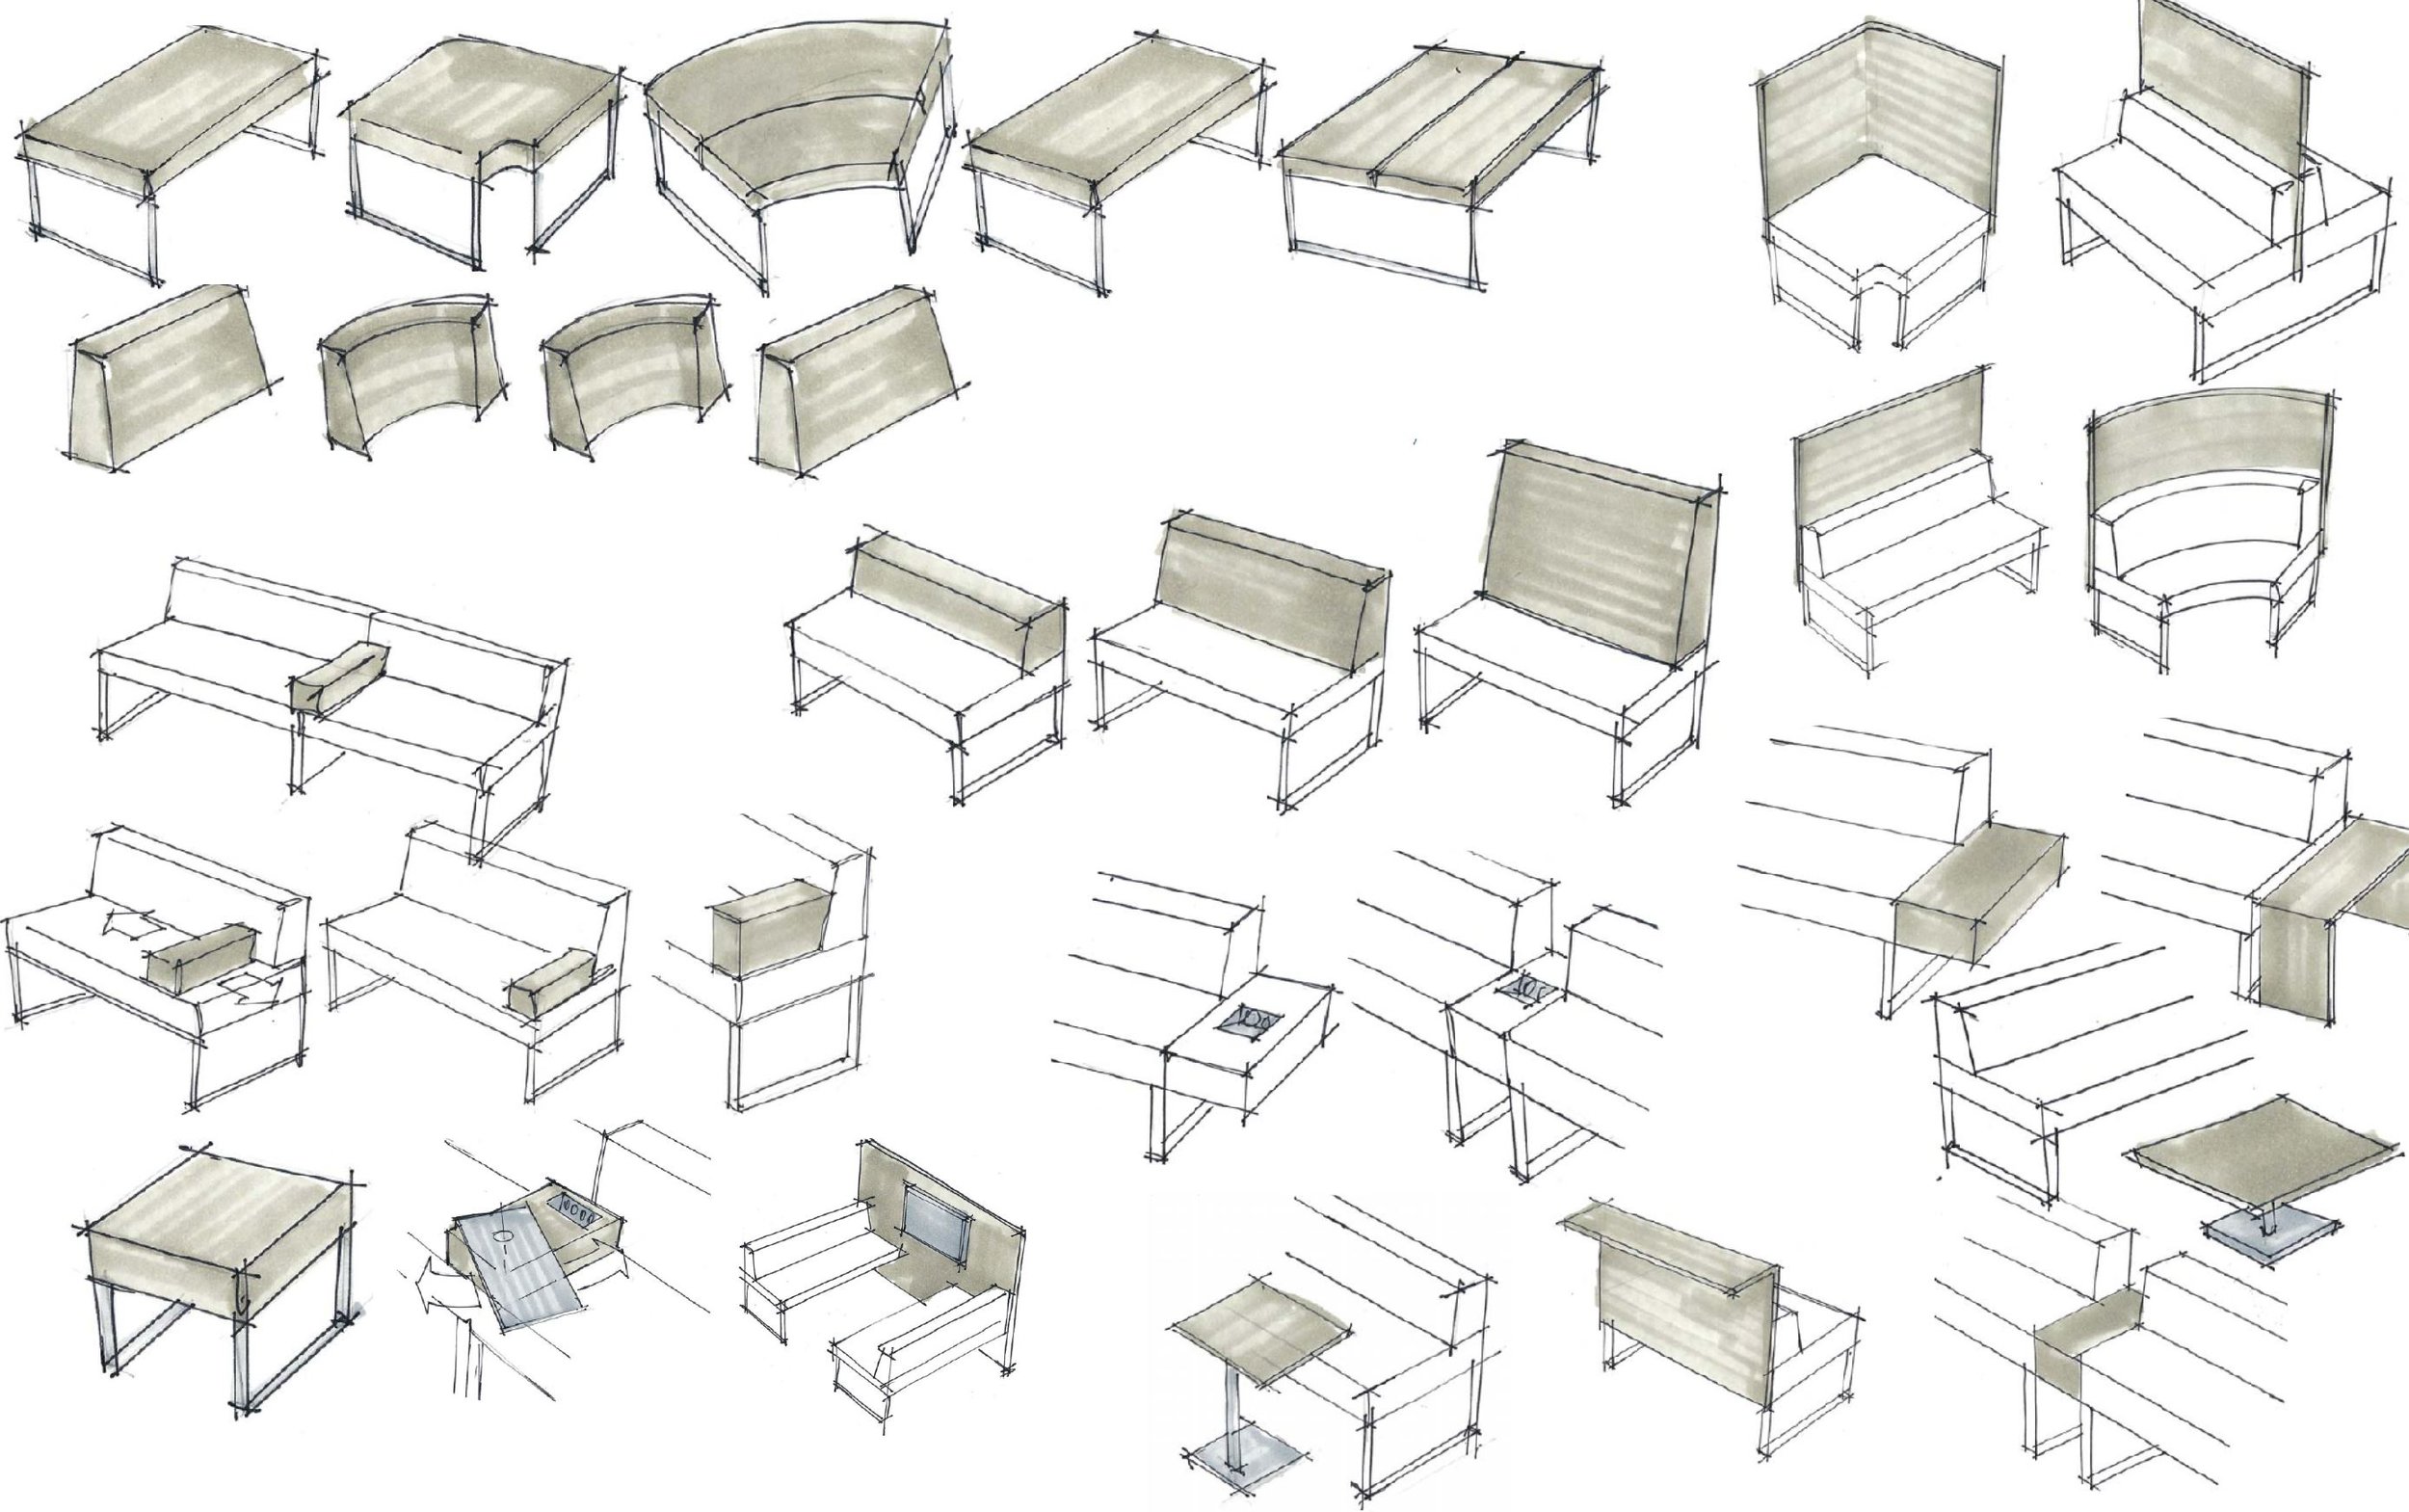  Ideations on seating configurations. 